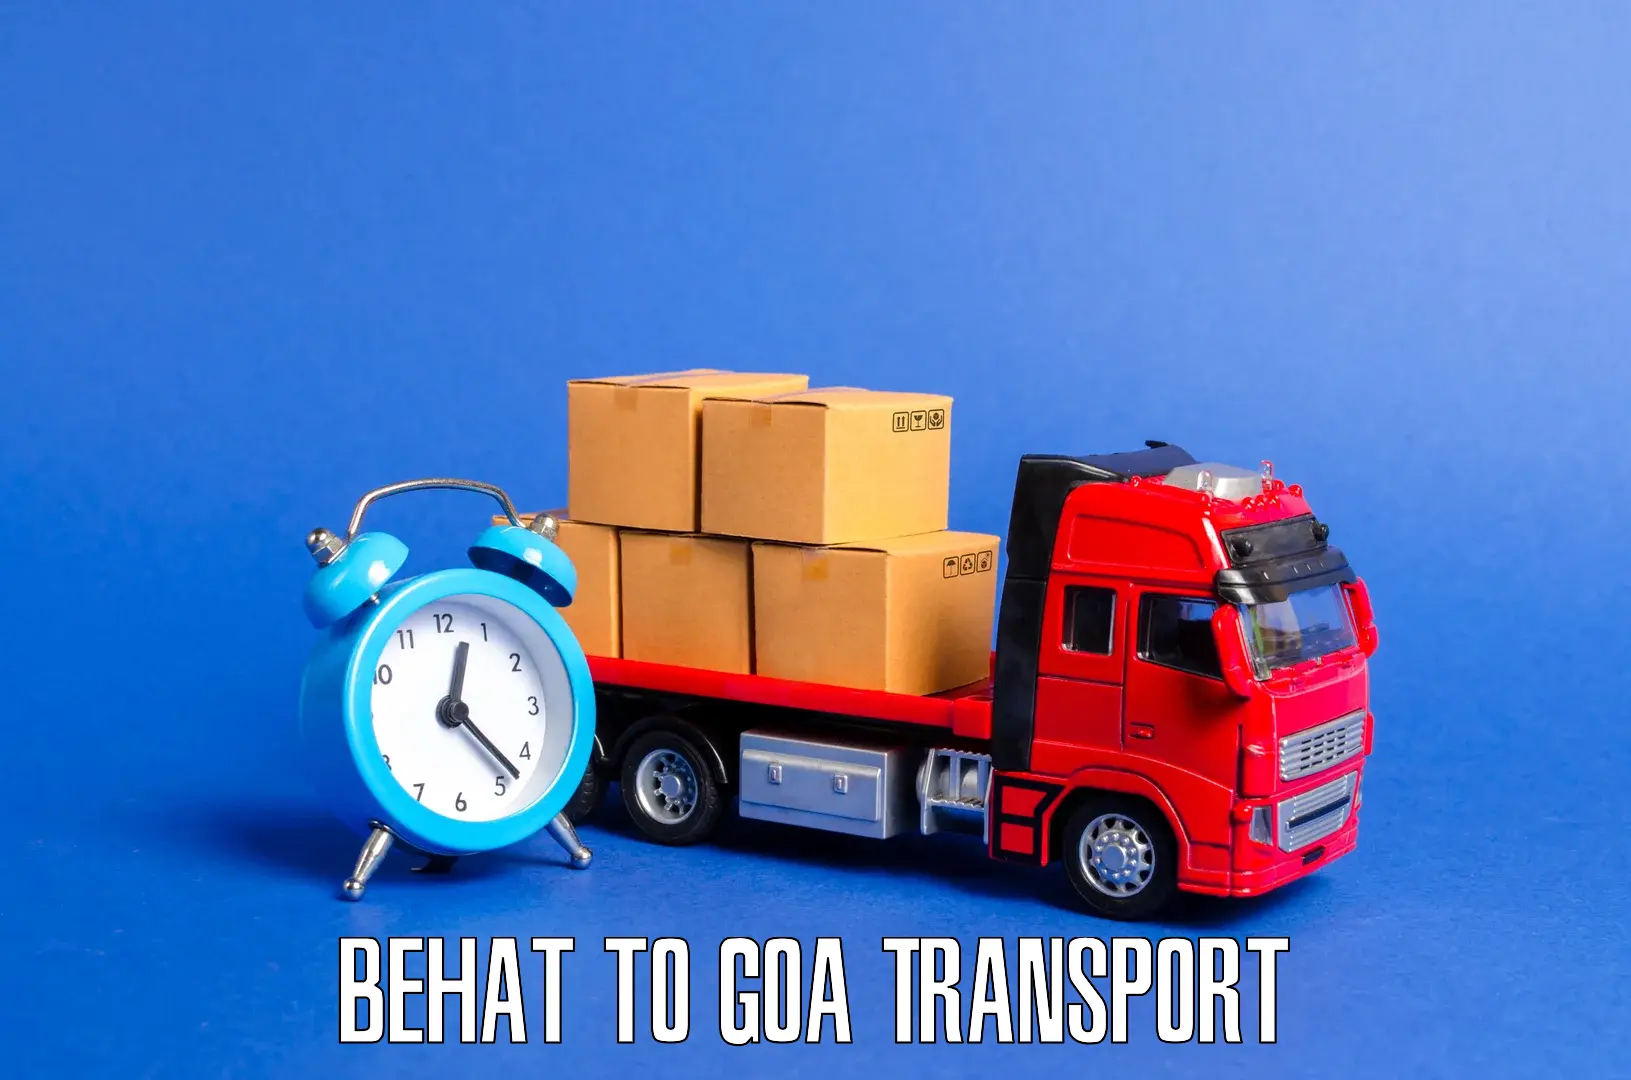 Transport in sharing Behat to Bardez